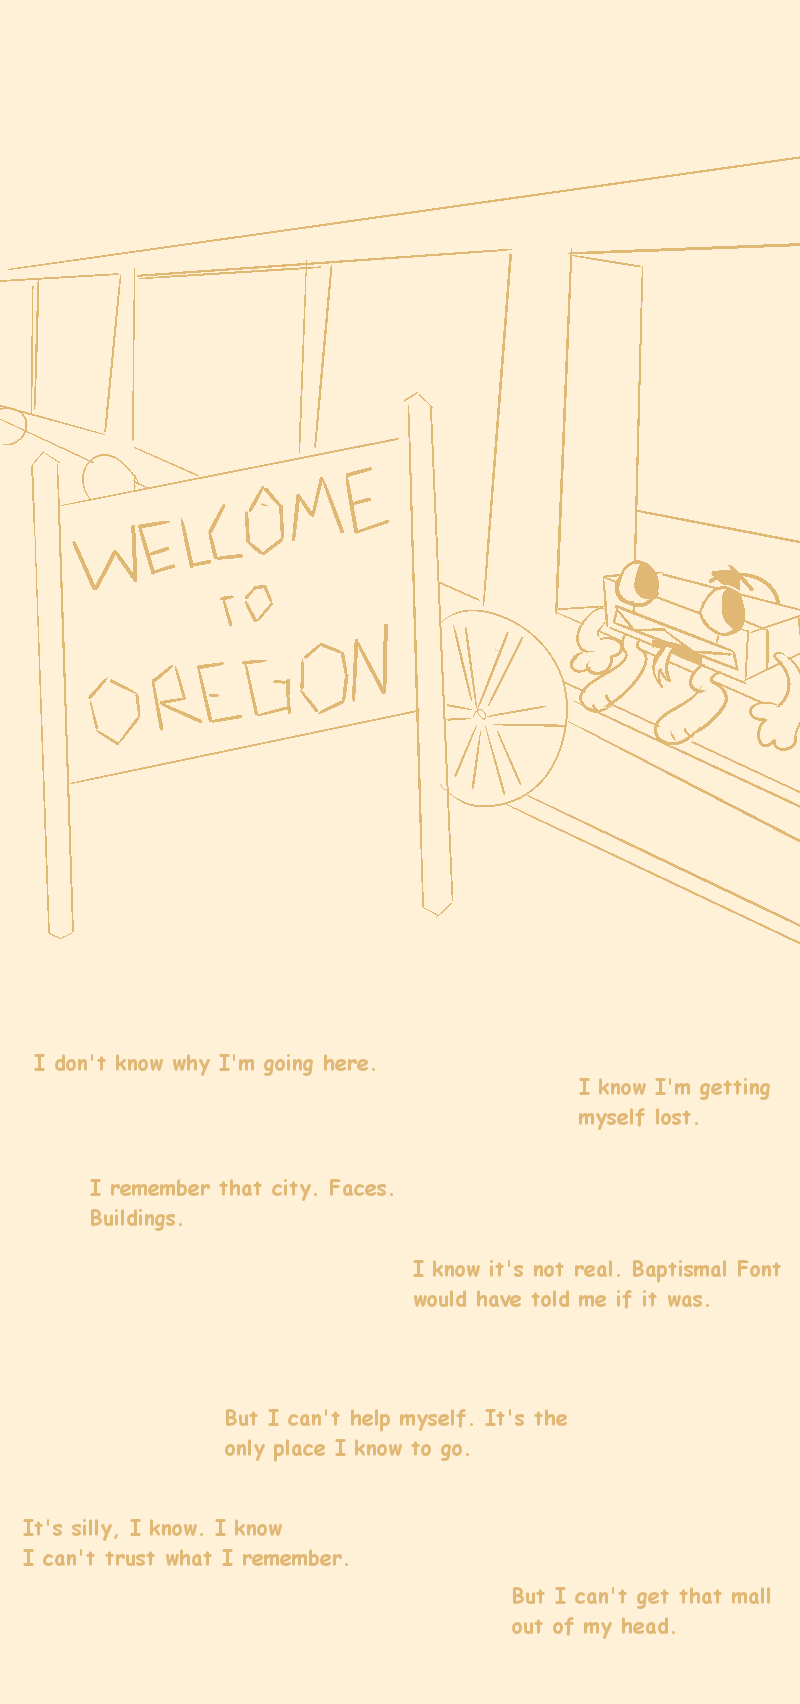 Image description: a crude drawing of VCR on a train, riding next to a sign saying 'Welcome to Oregon' The text says 'I don't know why I'm going here. I know I'm getting myself lost. I remember that city. Faces. Buildings. I know it's not real. Baptismal Font would have told me if it was. But I can't help myself. It's the only place I know to go. It's silly, I know. I know I can't trust what I remember. But I can't get it out of my head.' End description.